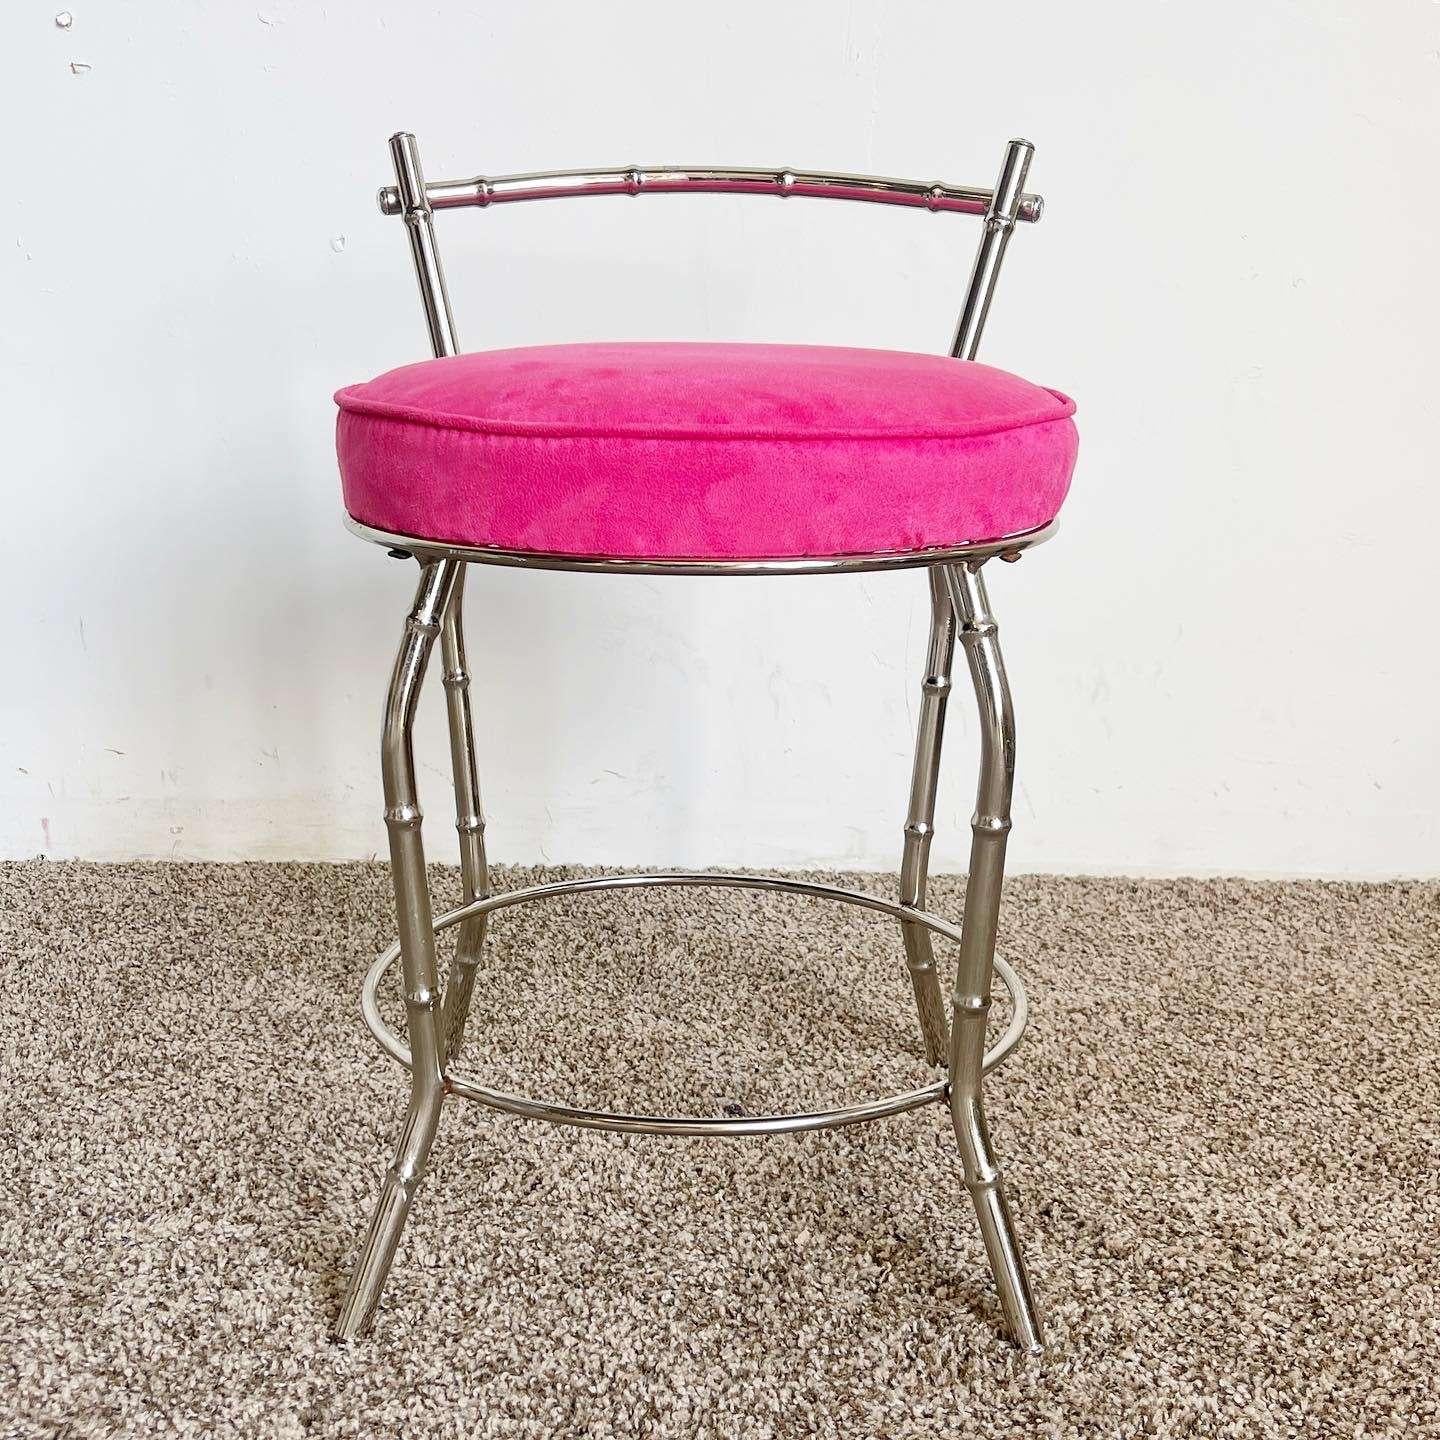 Incredible vintage regency faux bamboo chrome low stool. Features a circular newly upholstered seat cushion with piping.
